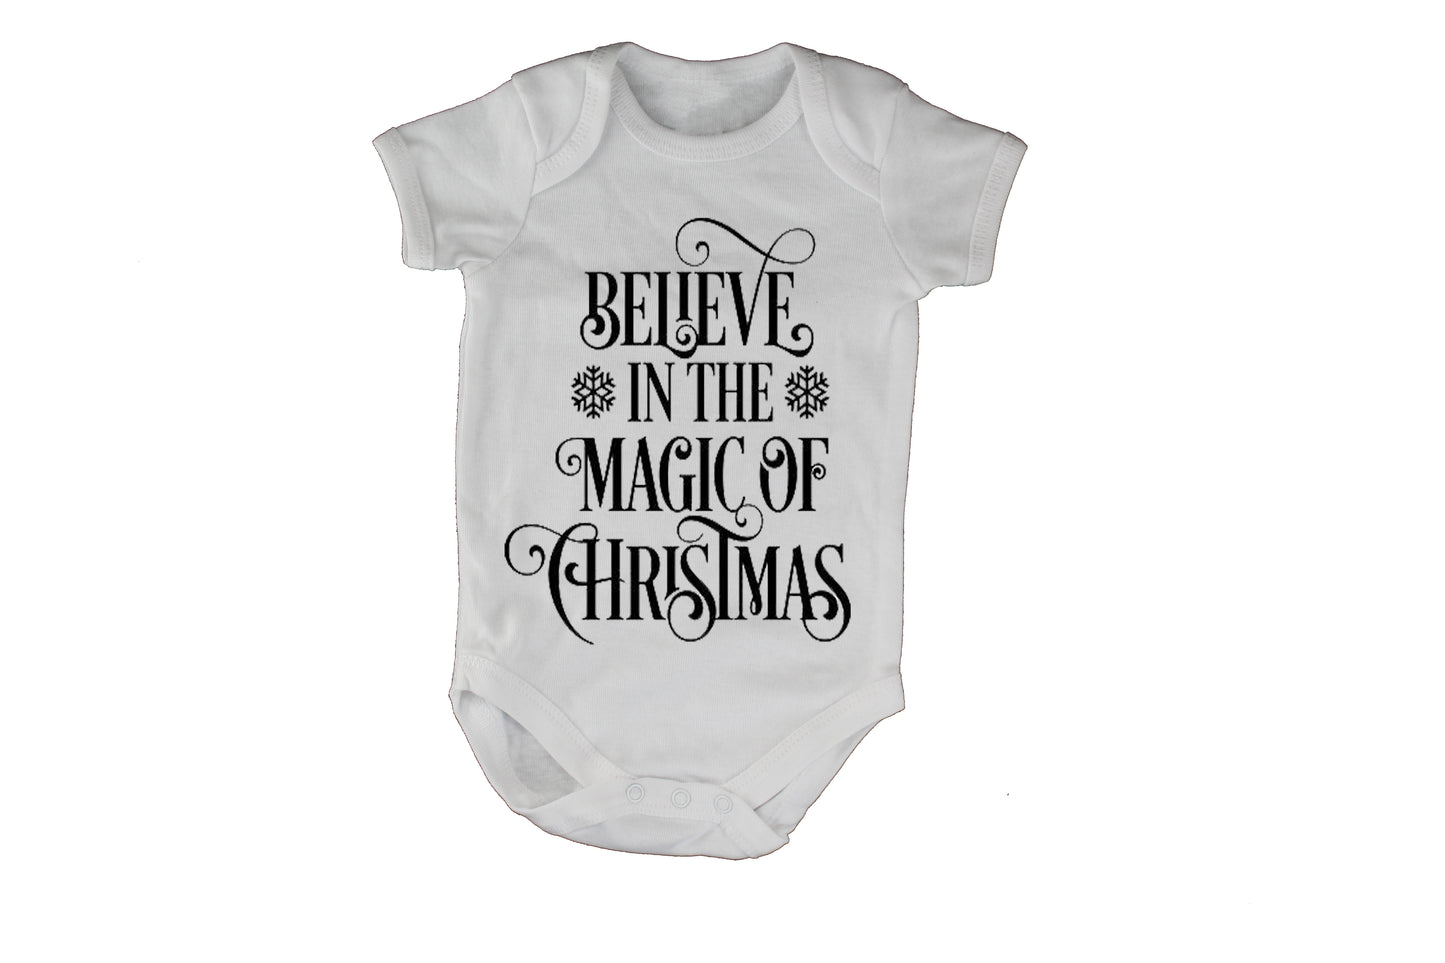 Believe in the Magic of Christmas! - BuyAbility South Africa